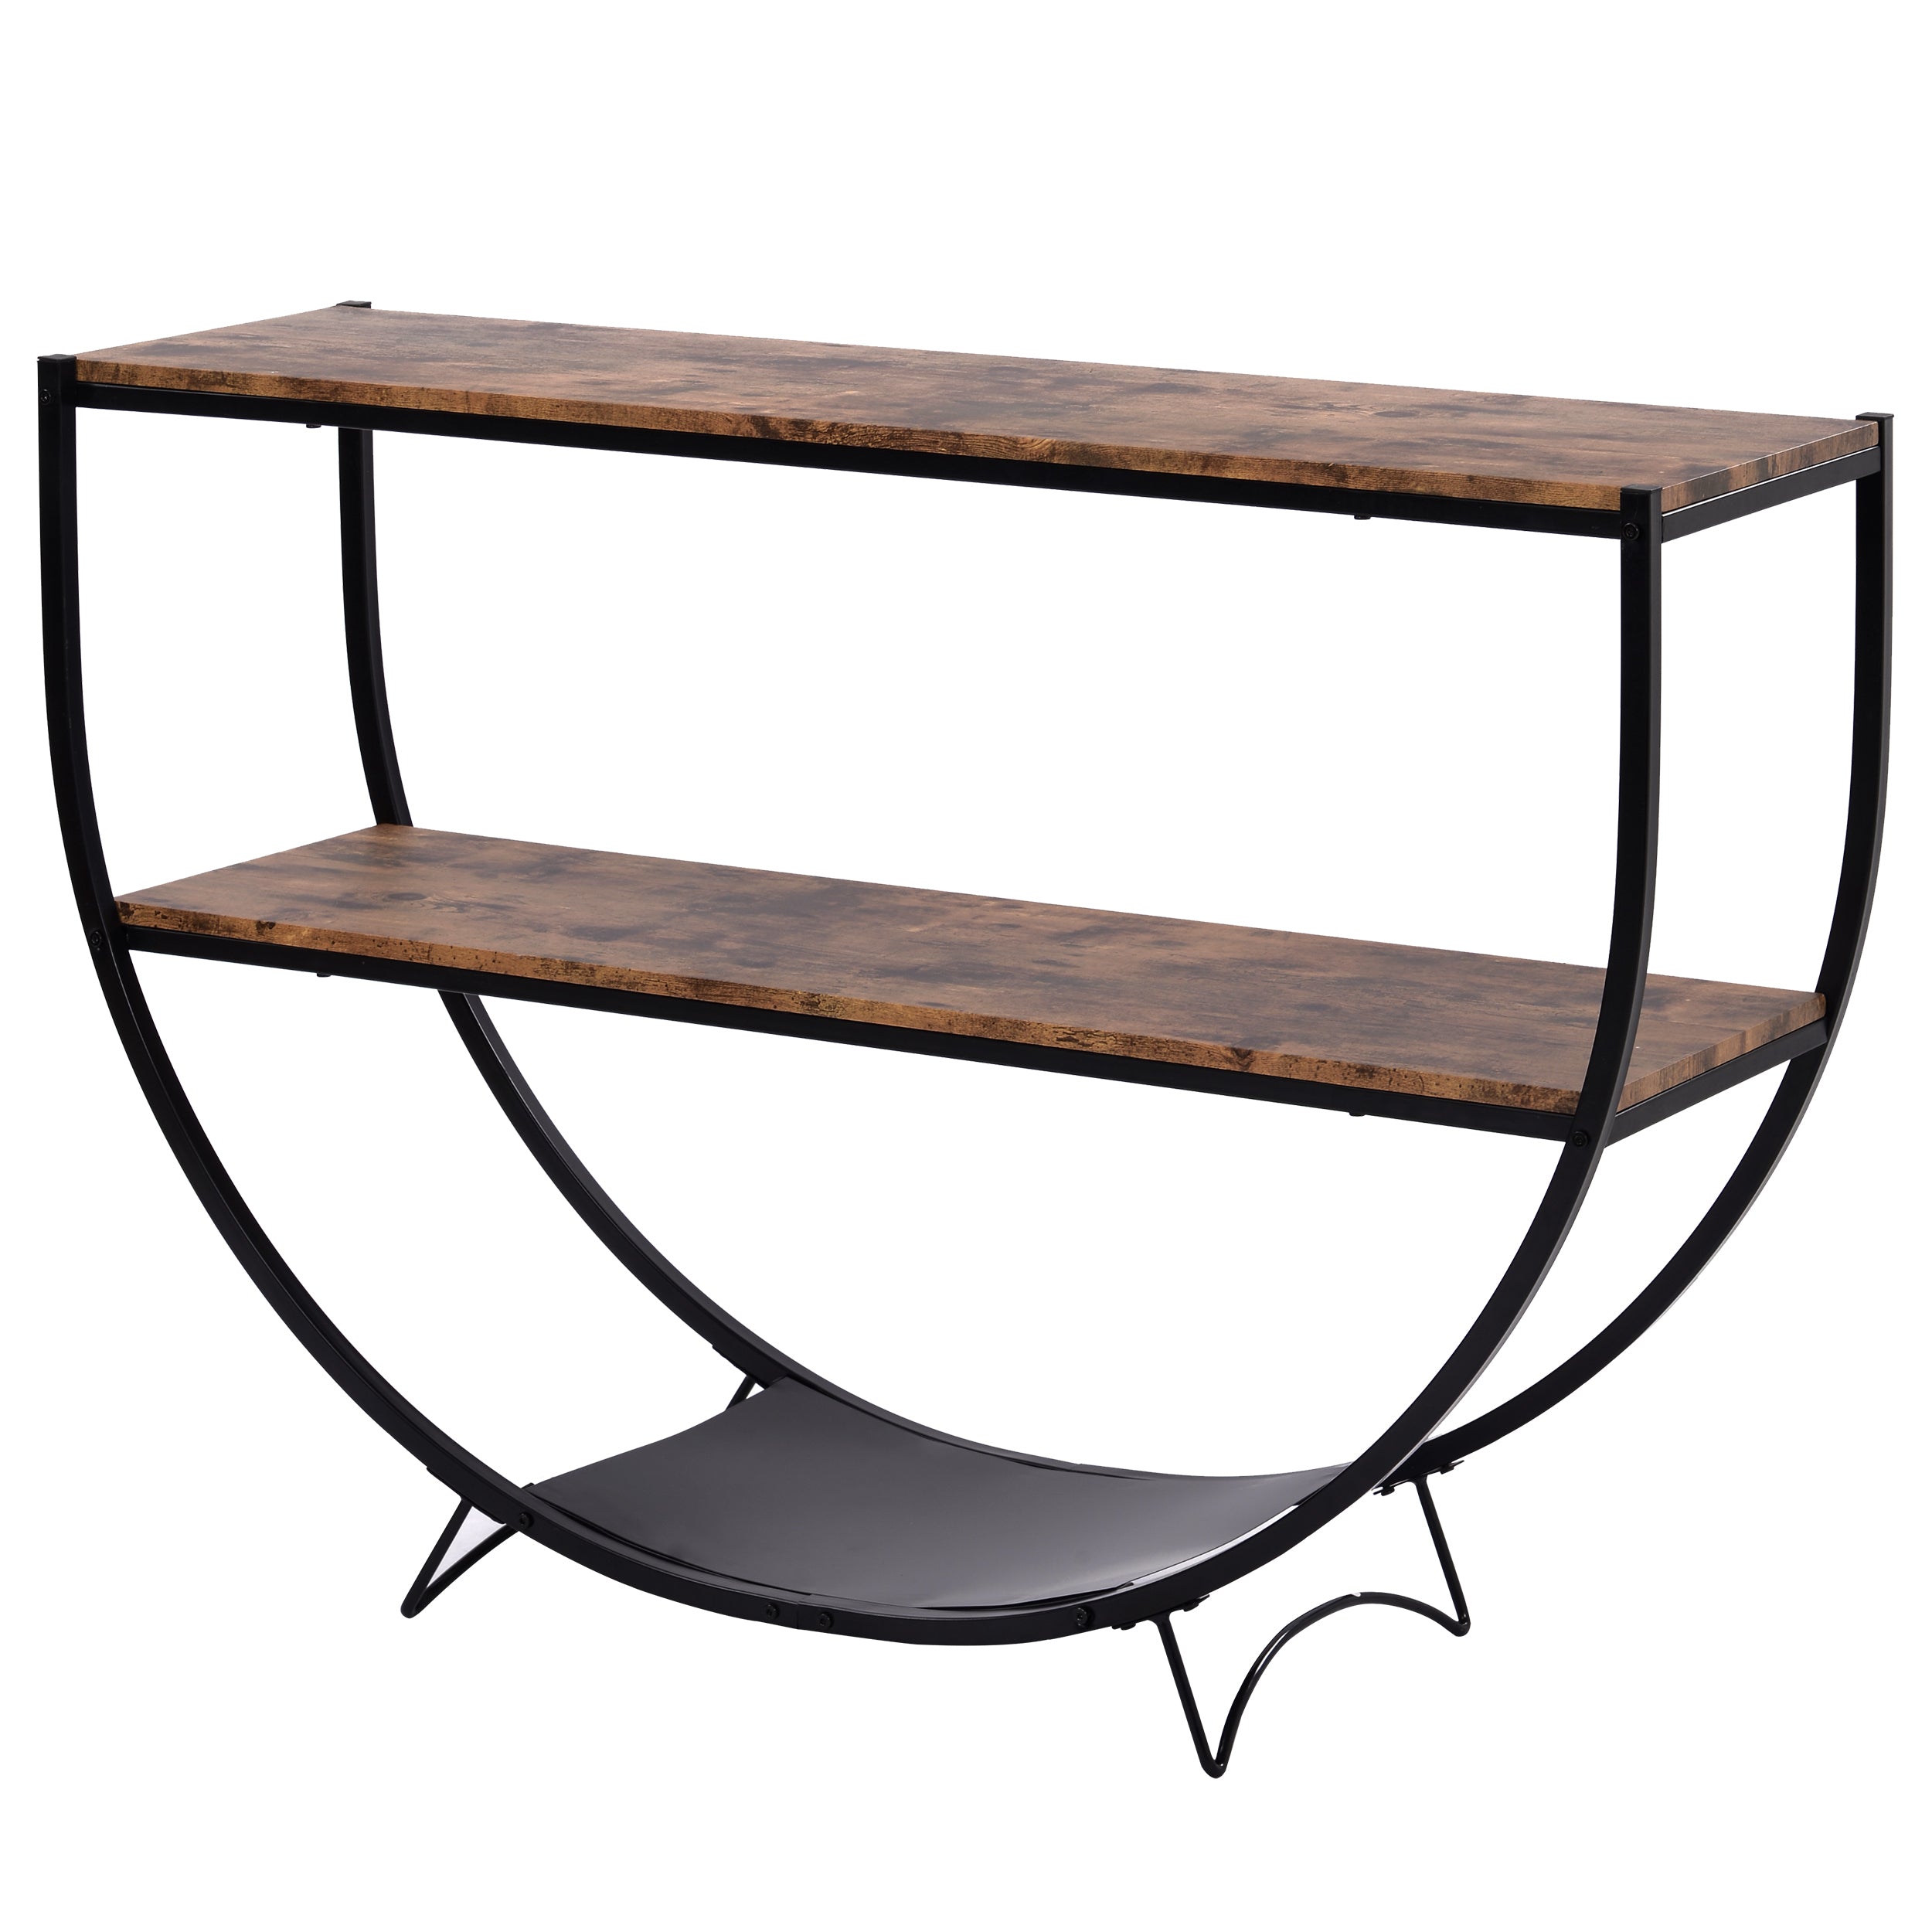 Rustic Industrial Design Demilune Shape Textured Metal Distressed Wood Console Table (Distressed Brown)